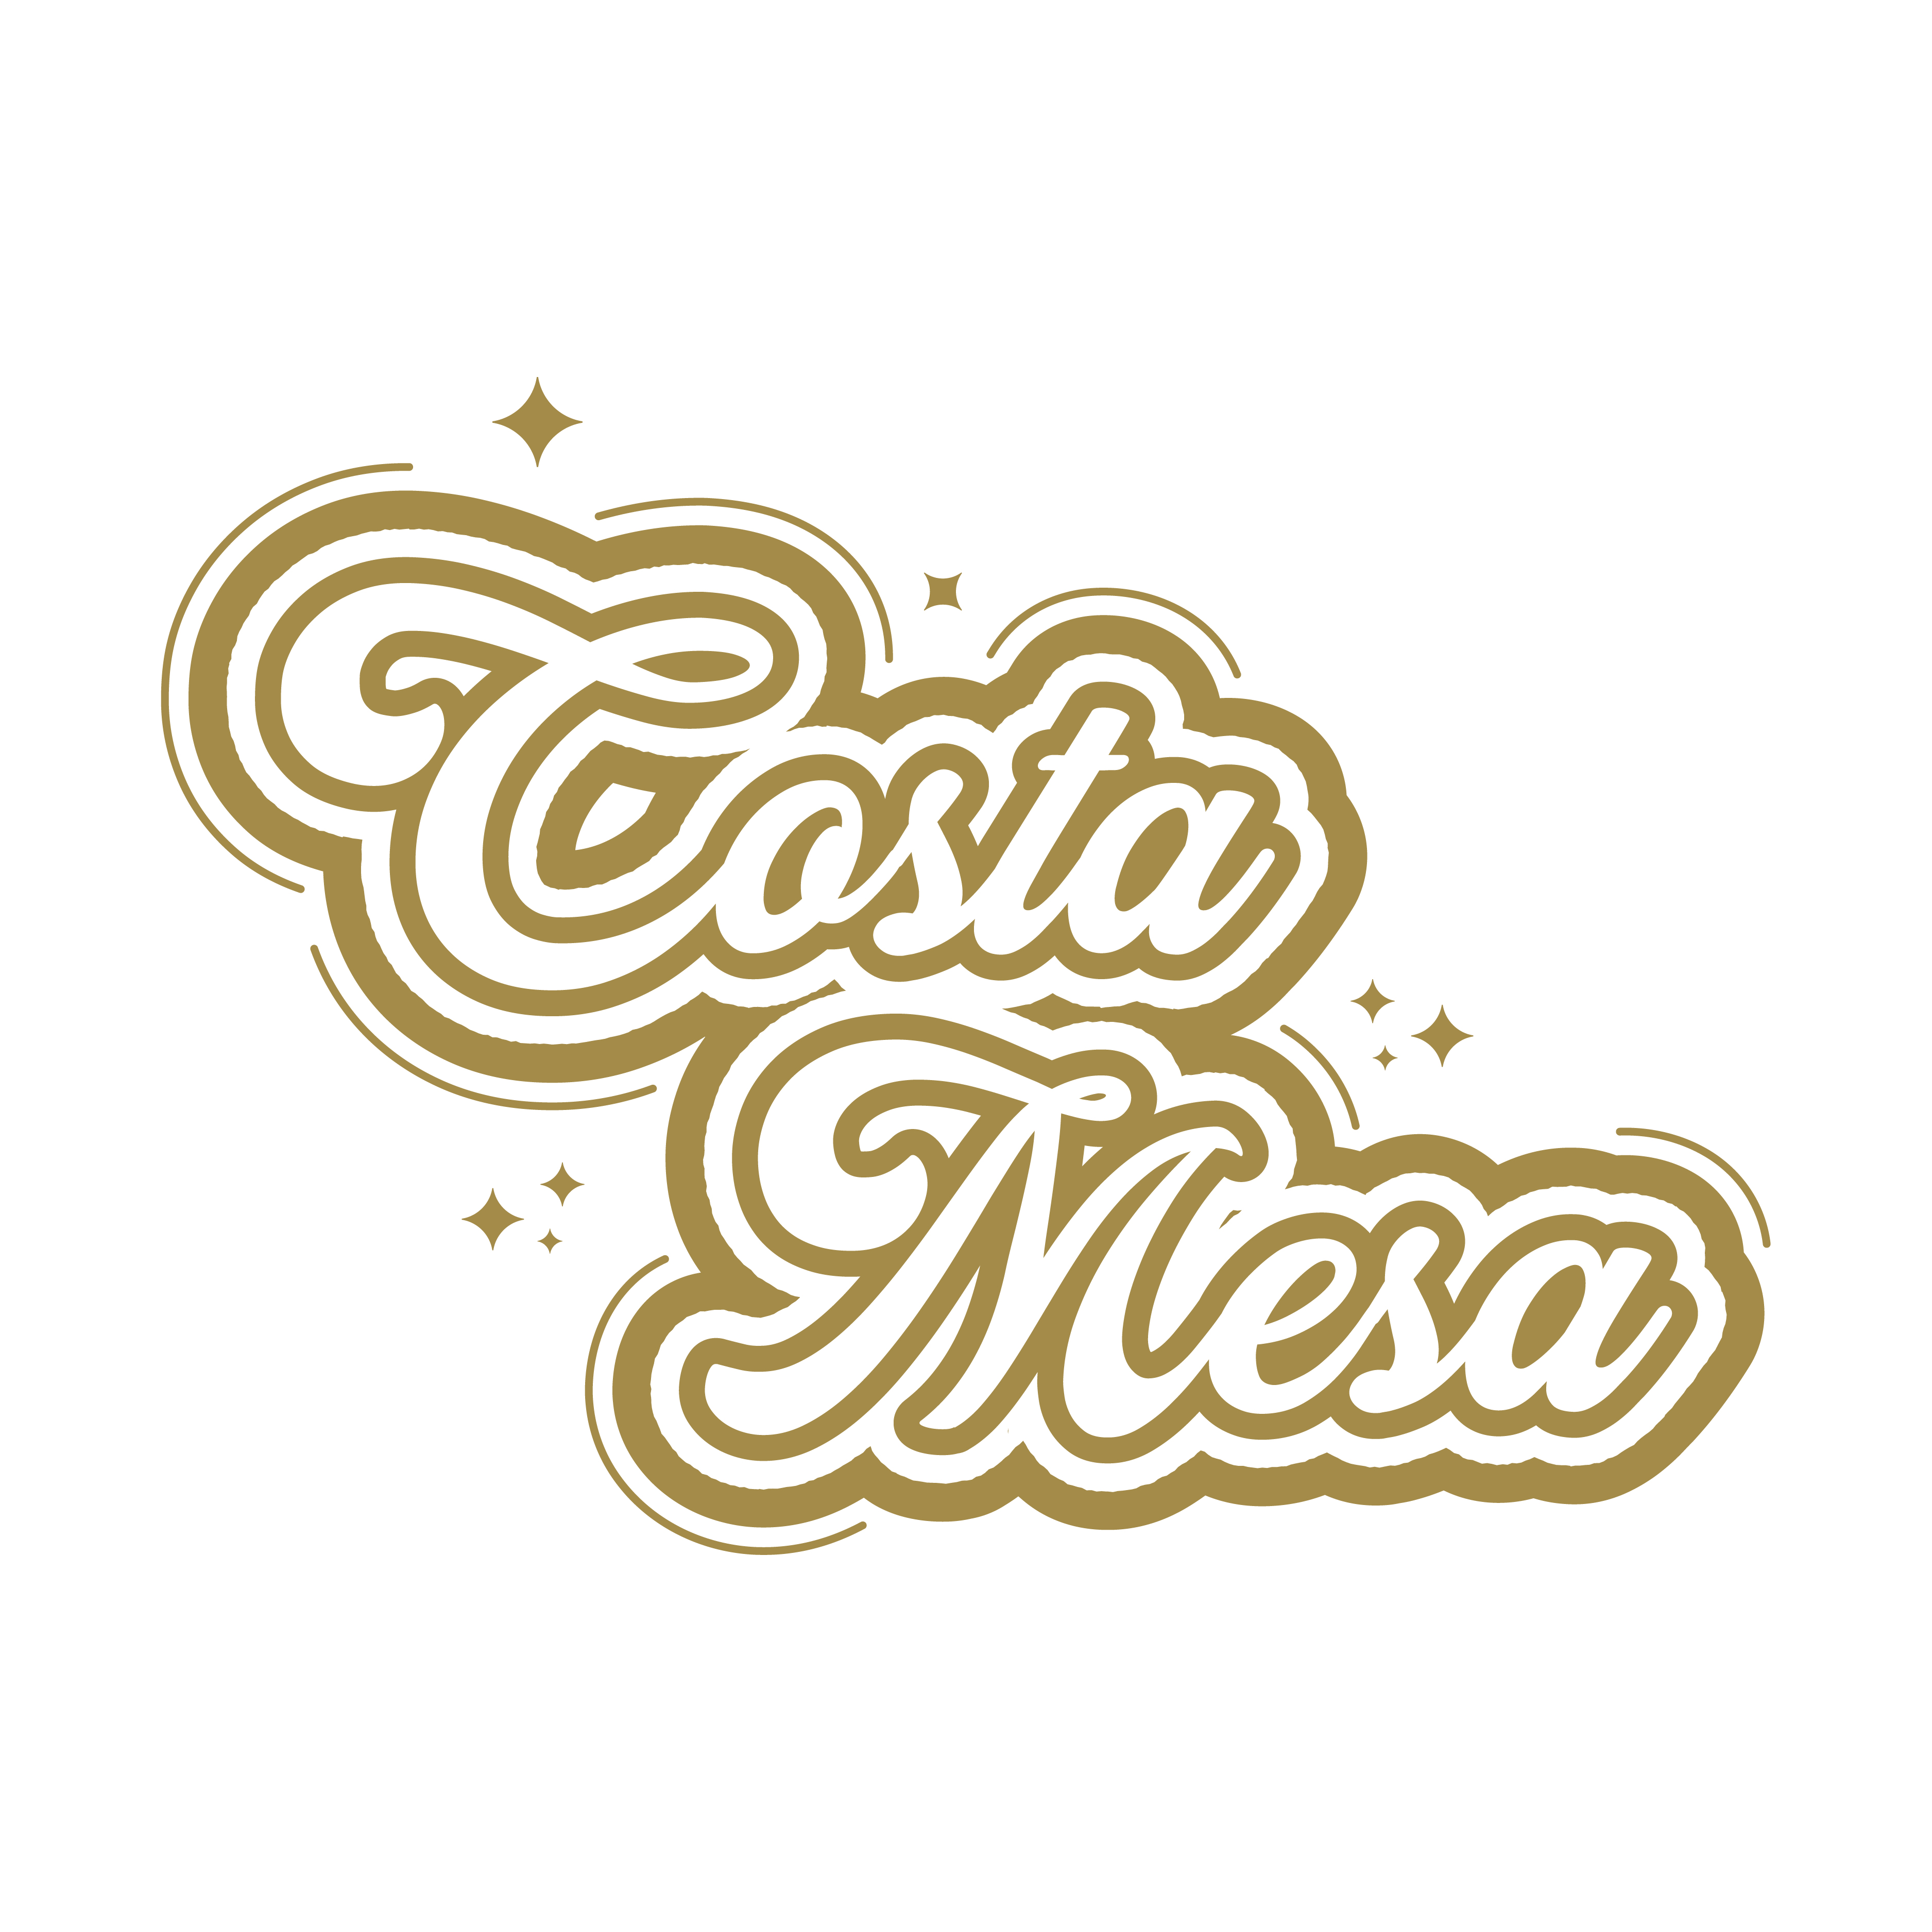 Costa Mesa Logo logo design by logo designer NienowBrand for your inspiration and for the worlds largest logo competition